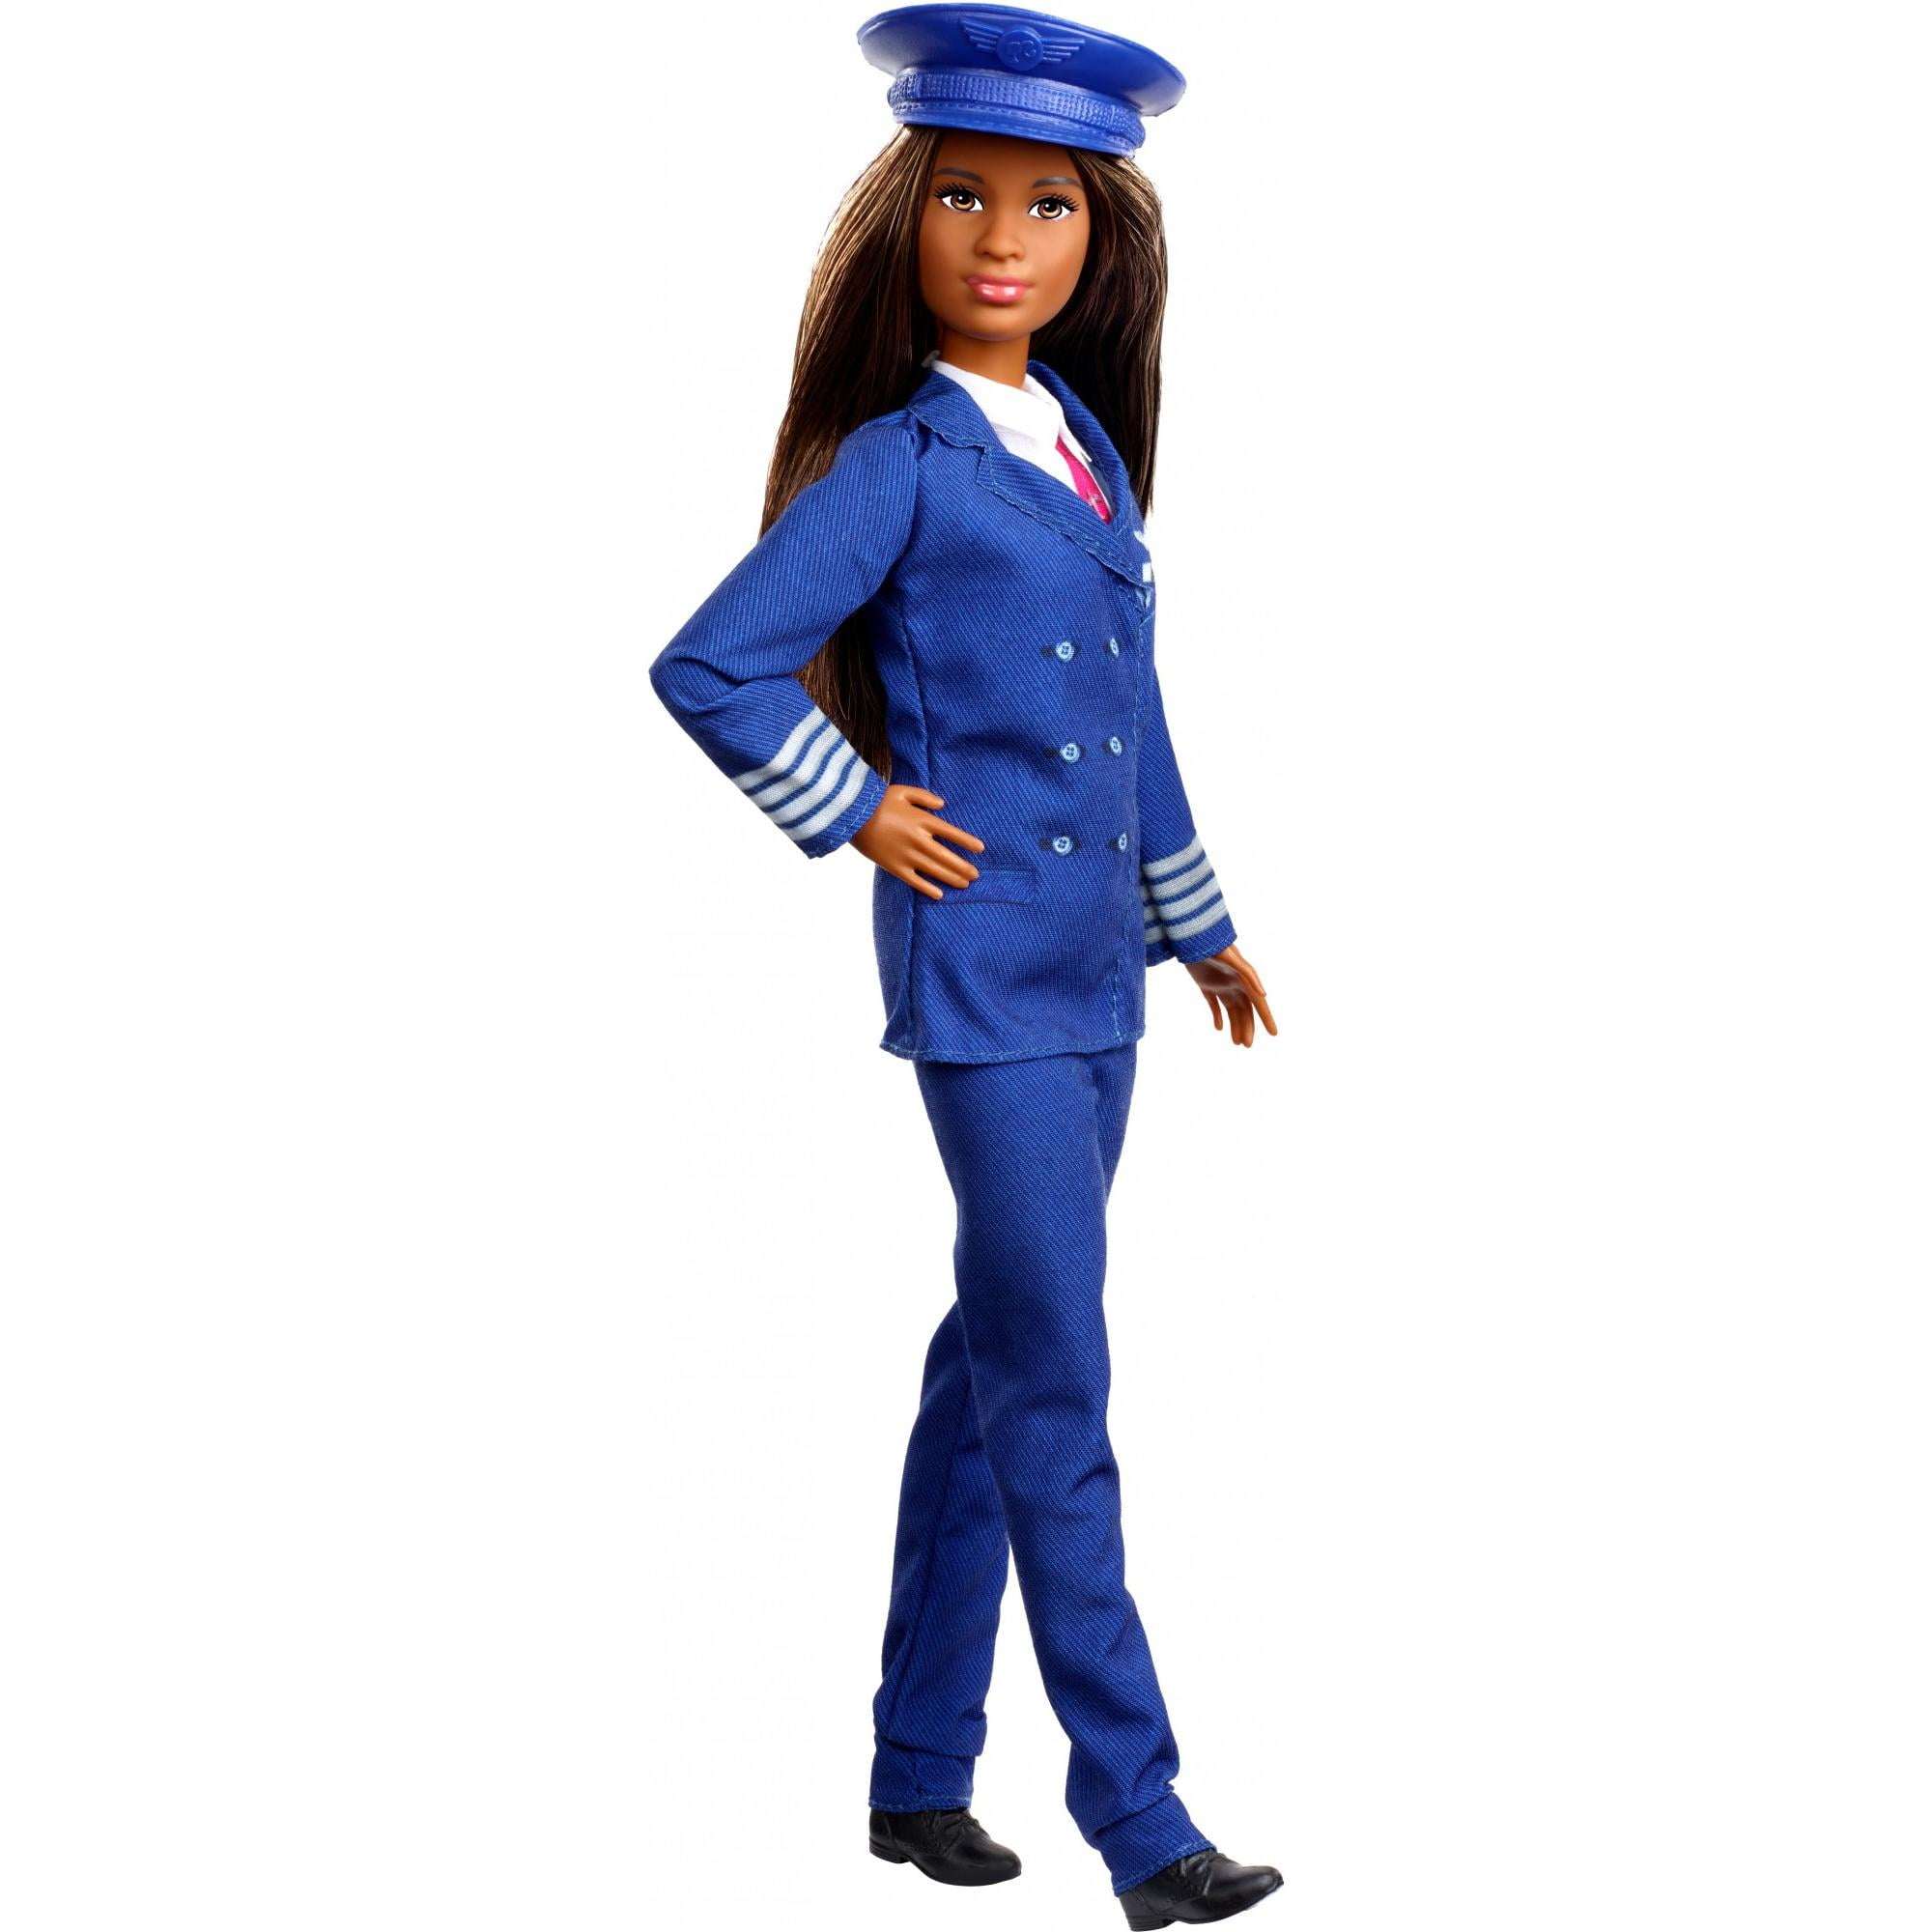 Barbie Careers Pilot Doll with Themed Accessories Doll Playset - Walmart.com